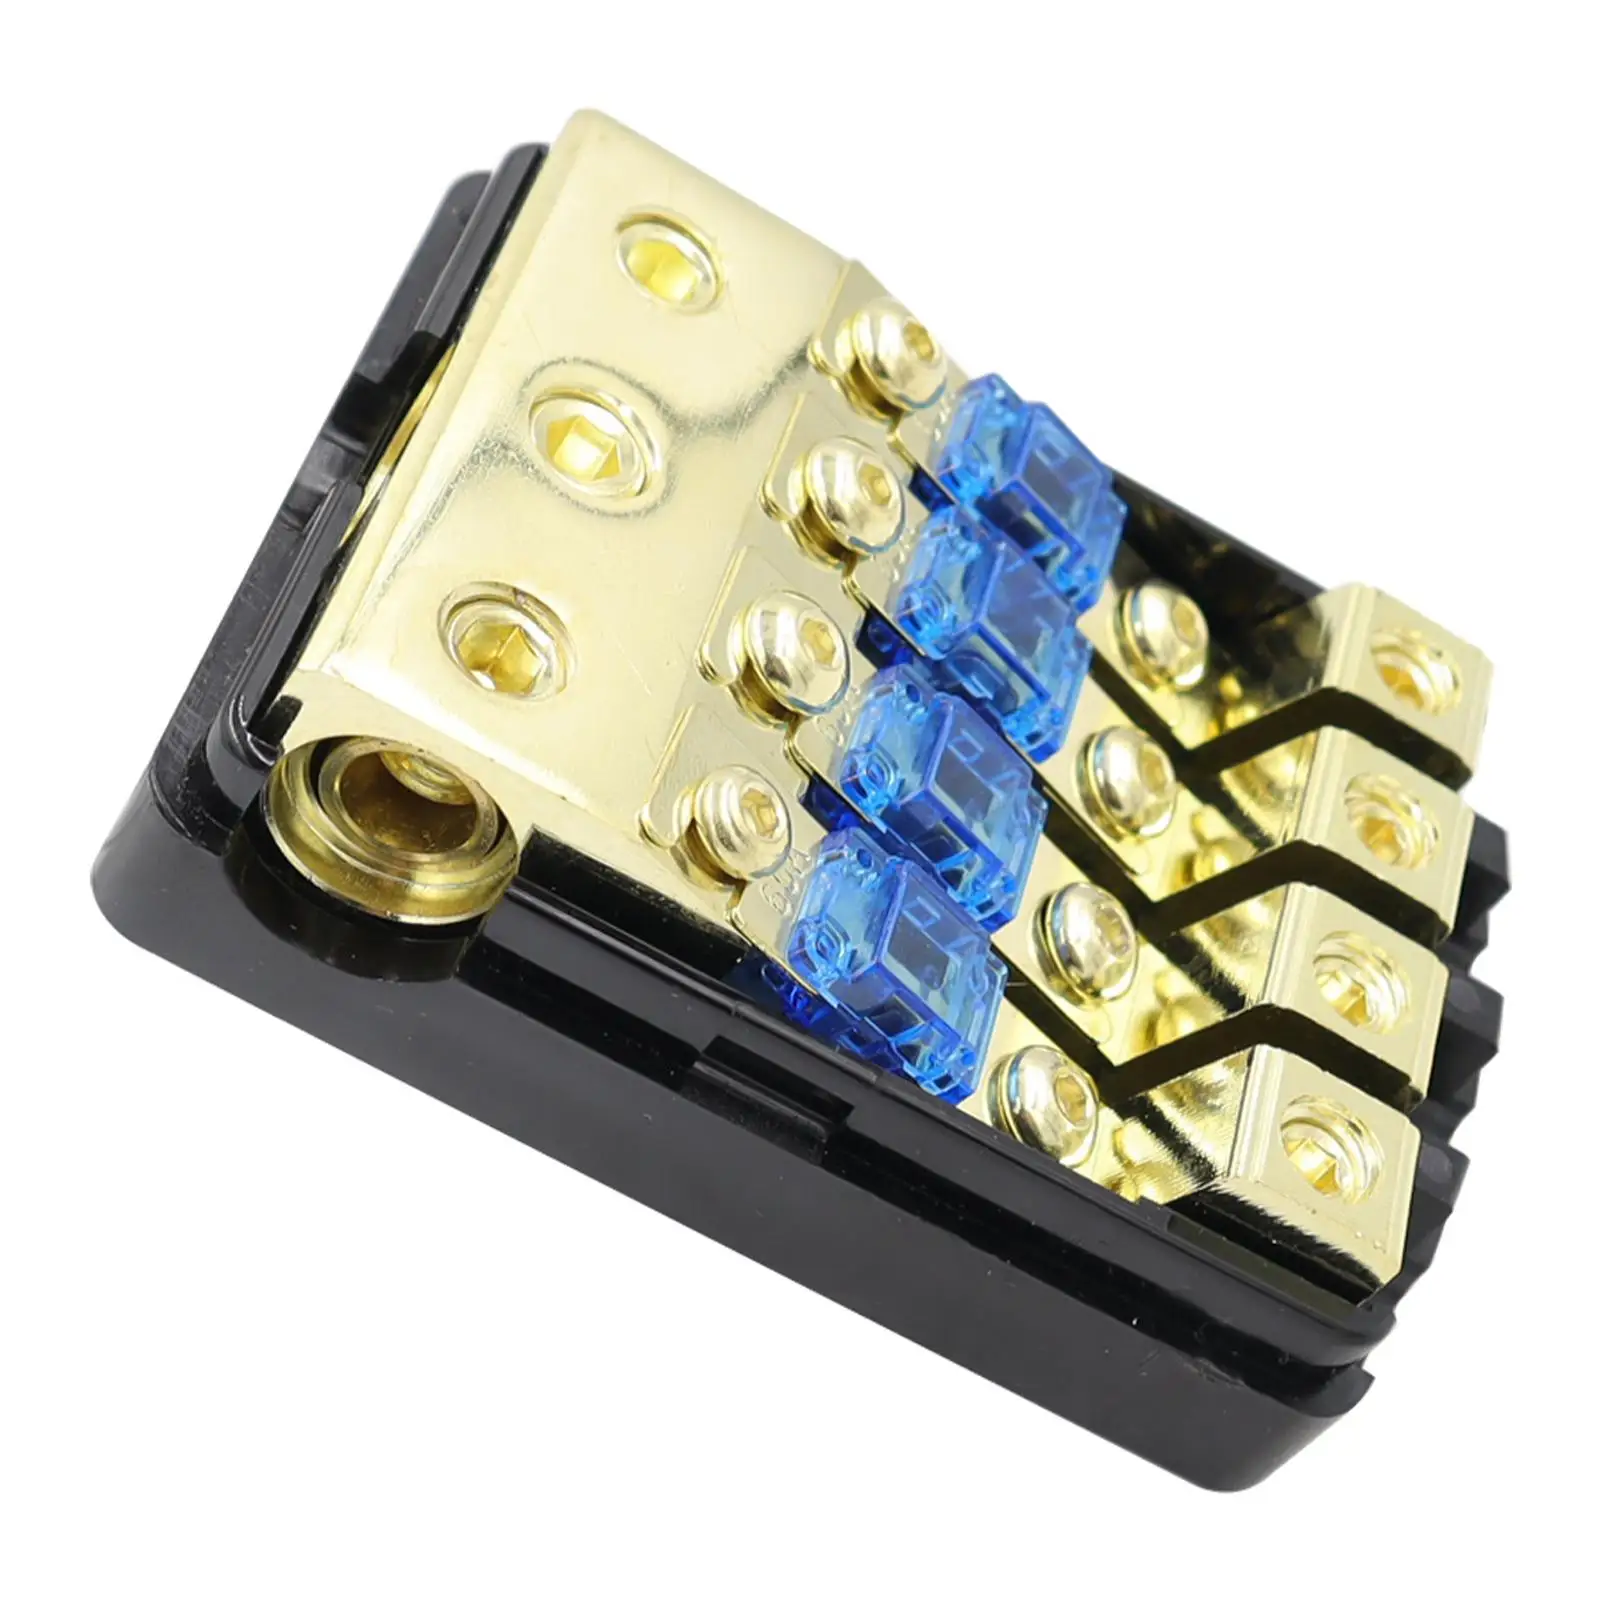 Mini Anl Fuse Holder 12V High Performance Easy to Install Replacement